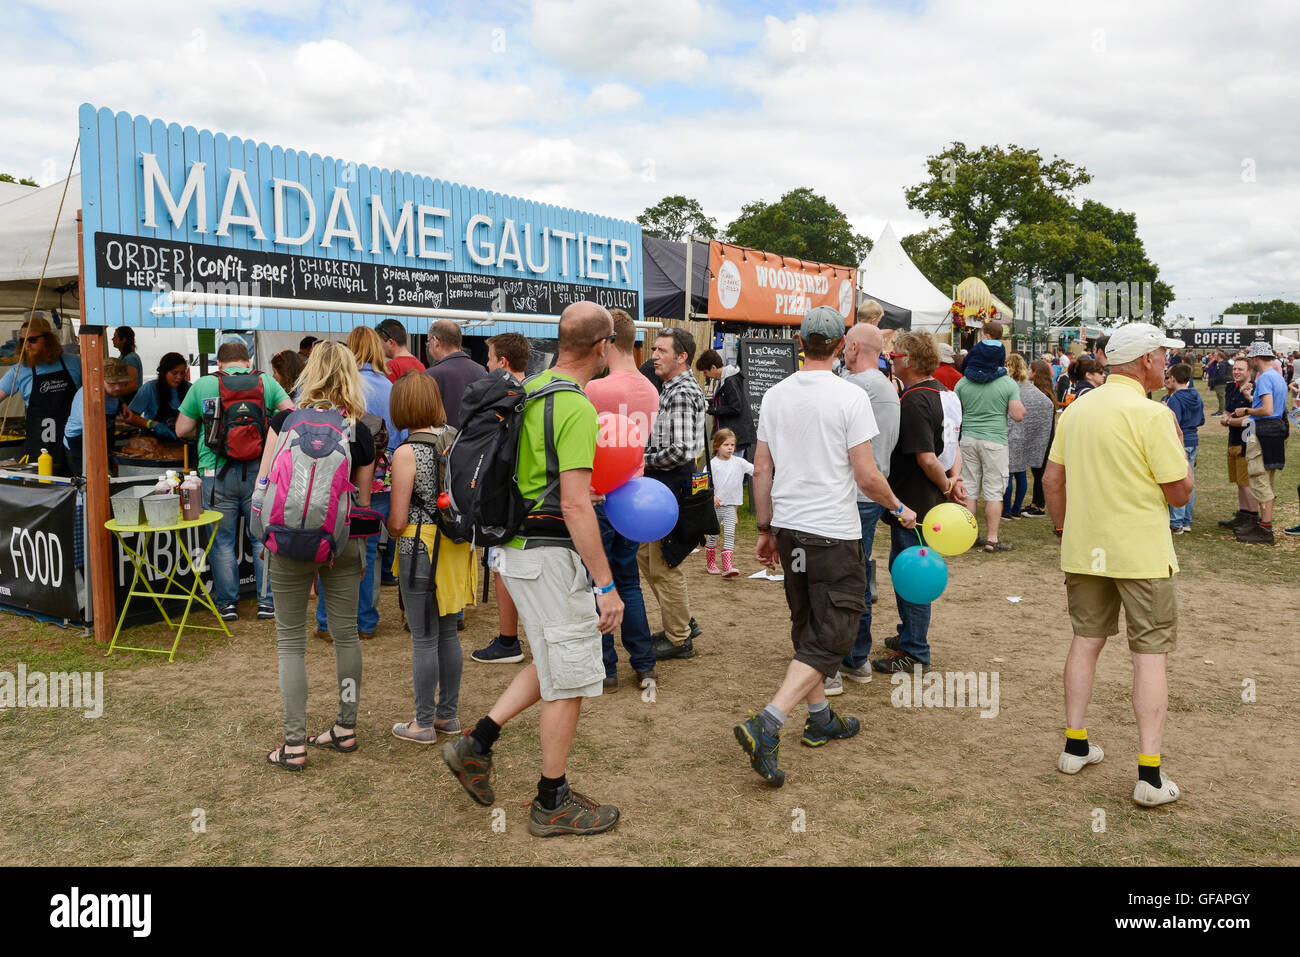 Carfest North, Bolesworth, Cheshire, UK. 30th July 2016. People queueing at one of the many food stalls. The event is the brainchild of Chris Evans and features 3 days of cars, music and entertainment with profits being donated to the charity Children in Need. Andrew Paterson/Alamy Live News Stock Photo